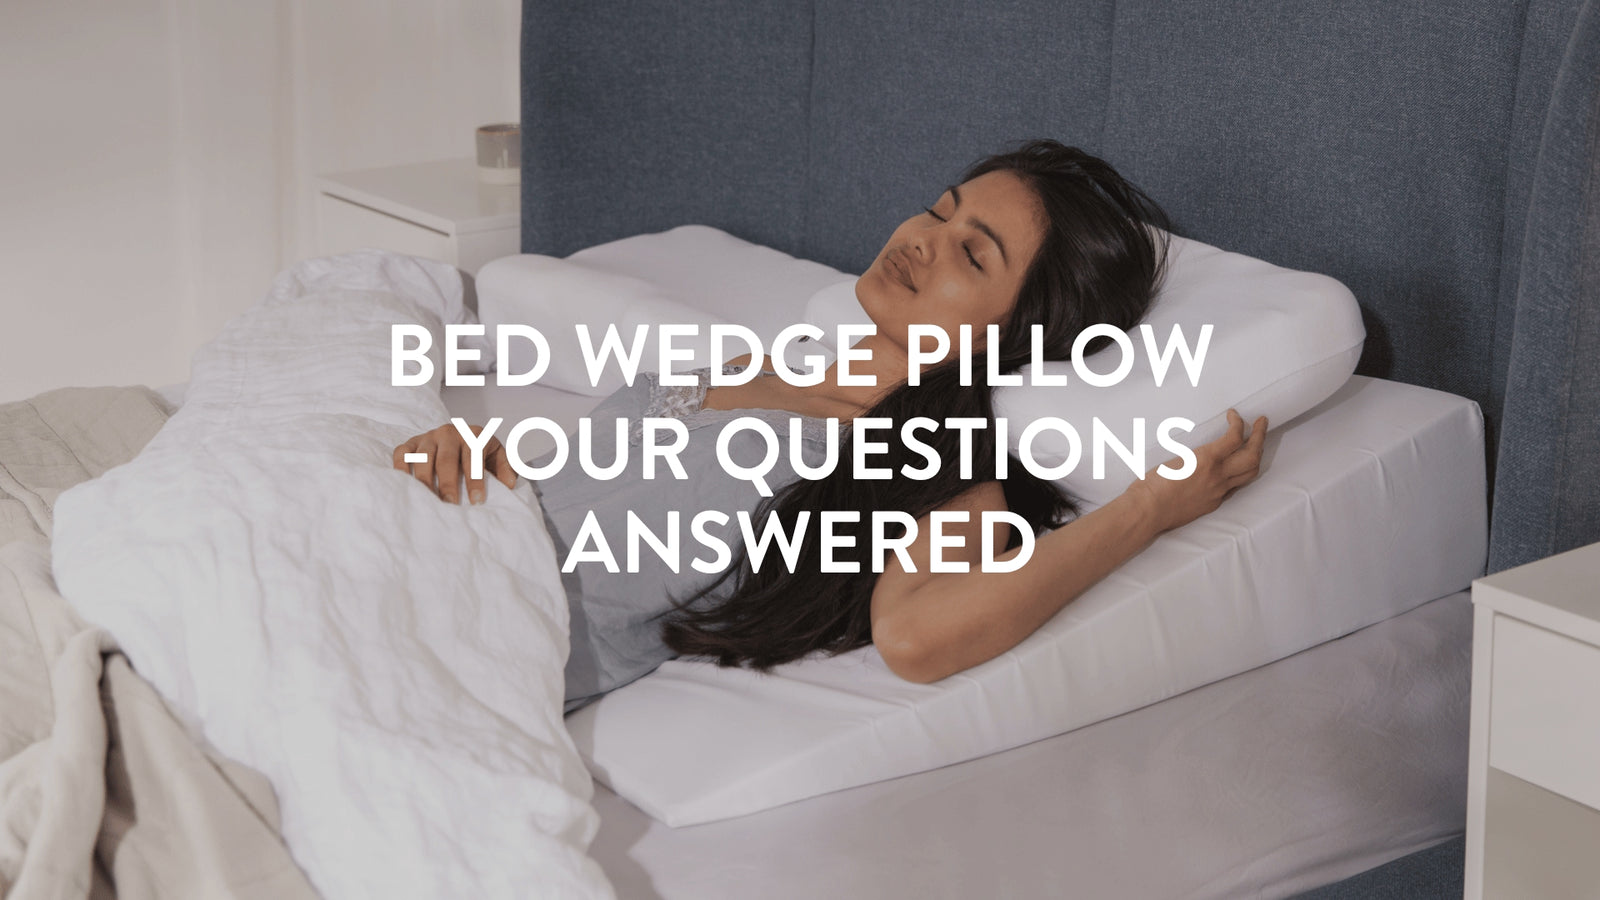 Bed Wedge Pillow - Your Questions Answered - Putnams UK